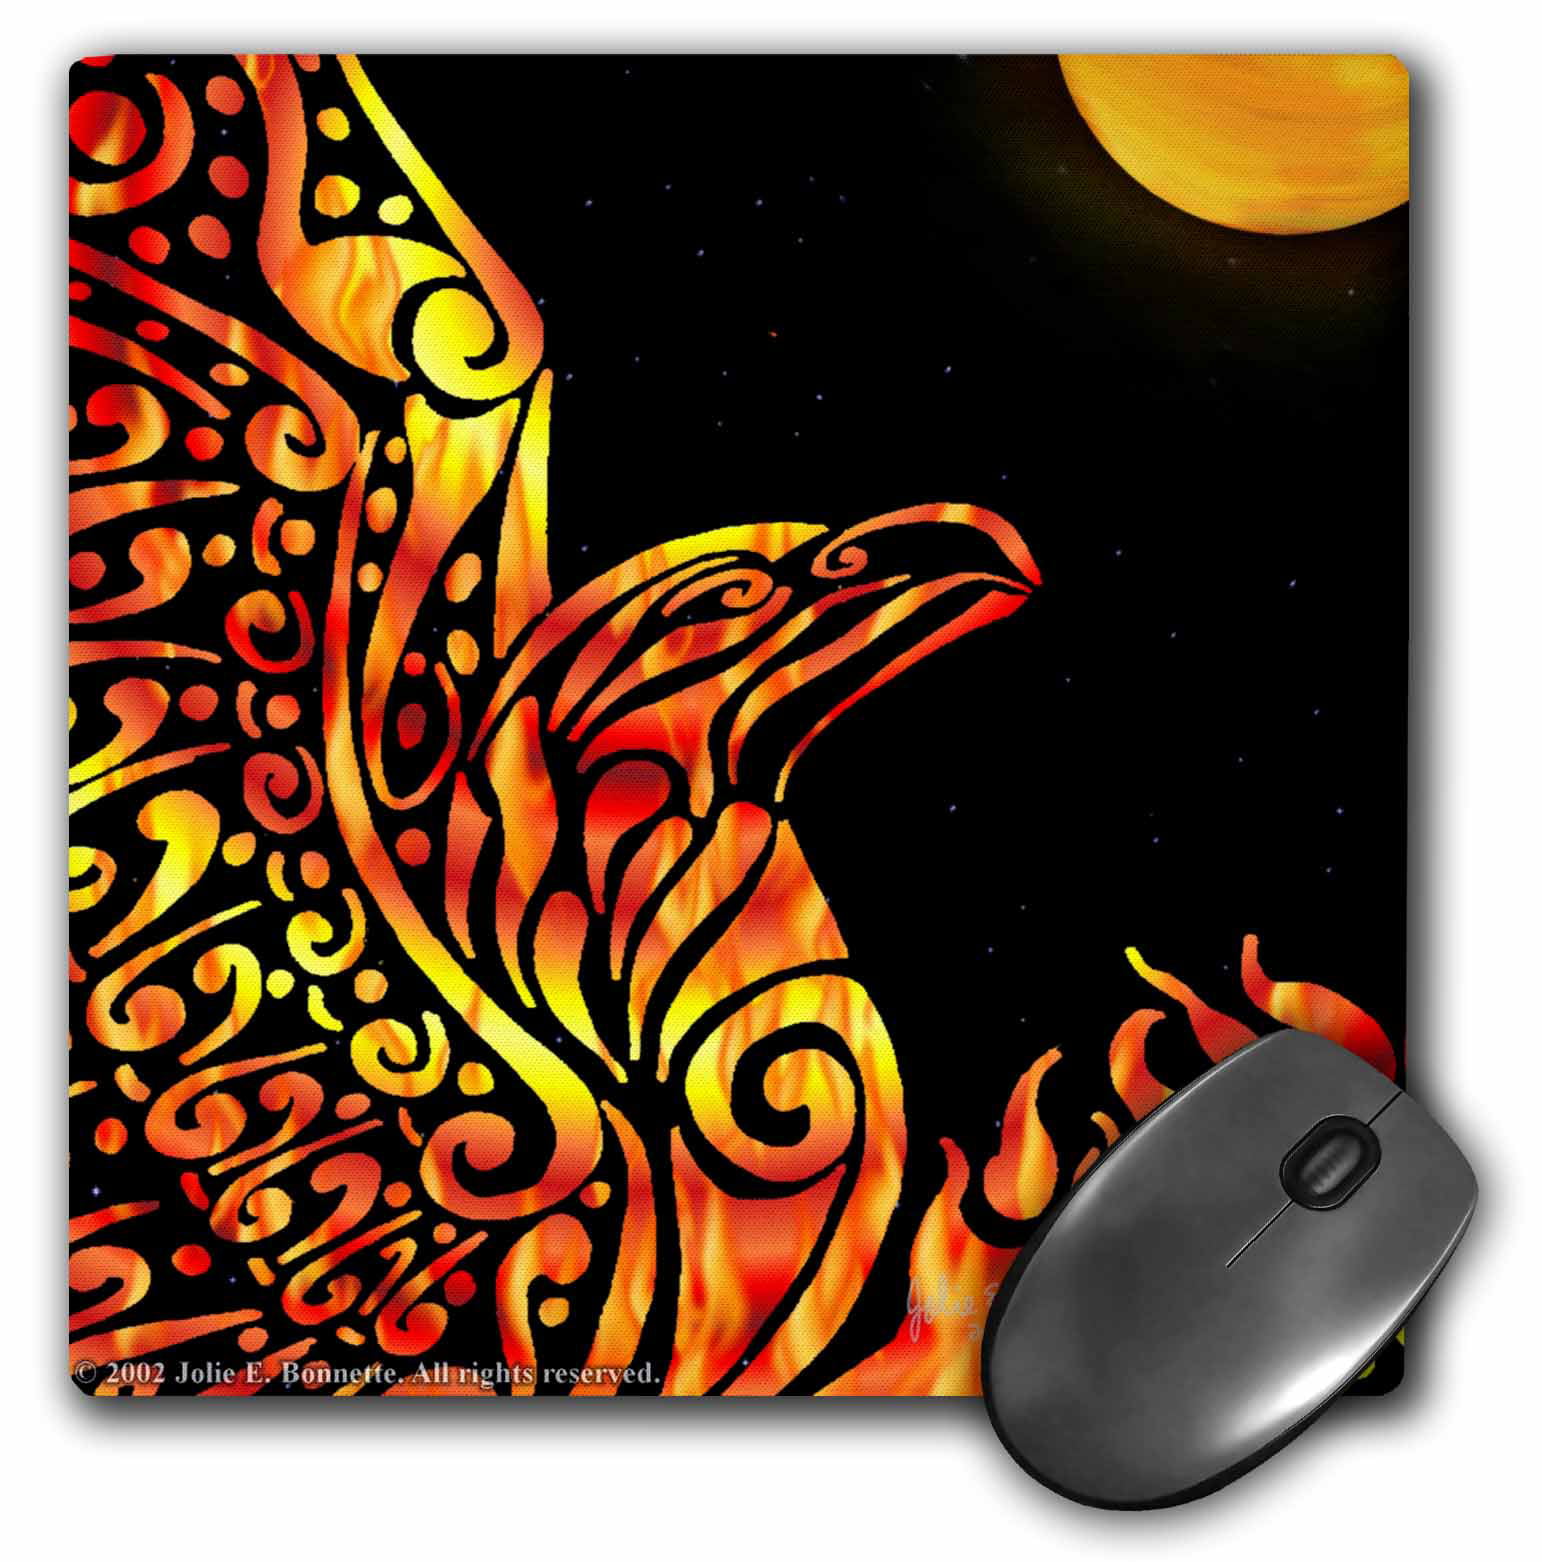 3dRose Phoenix Fantasy Fire Tribal , Mouse Pad, 8 by 8 inches - Walmart.com